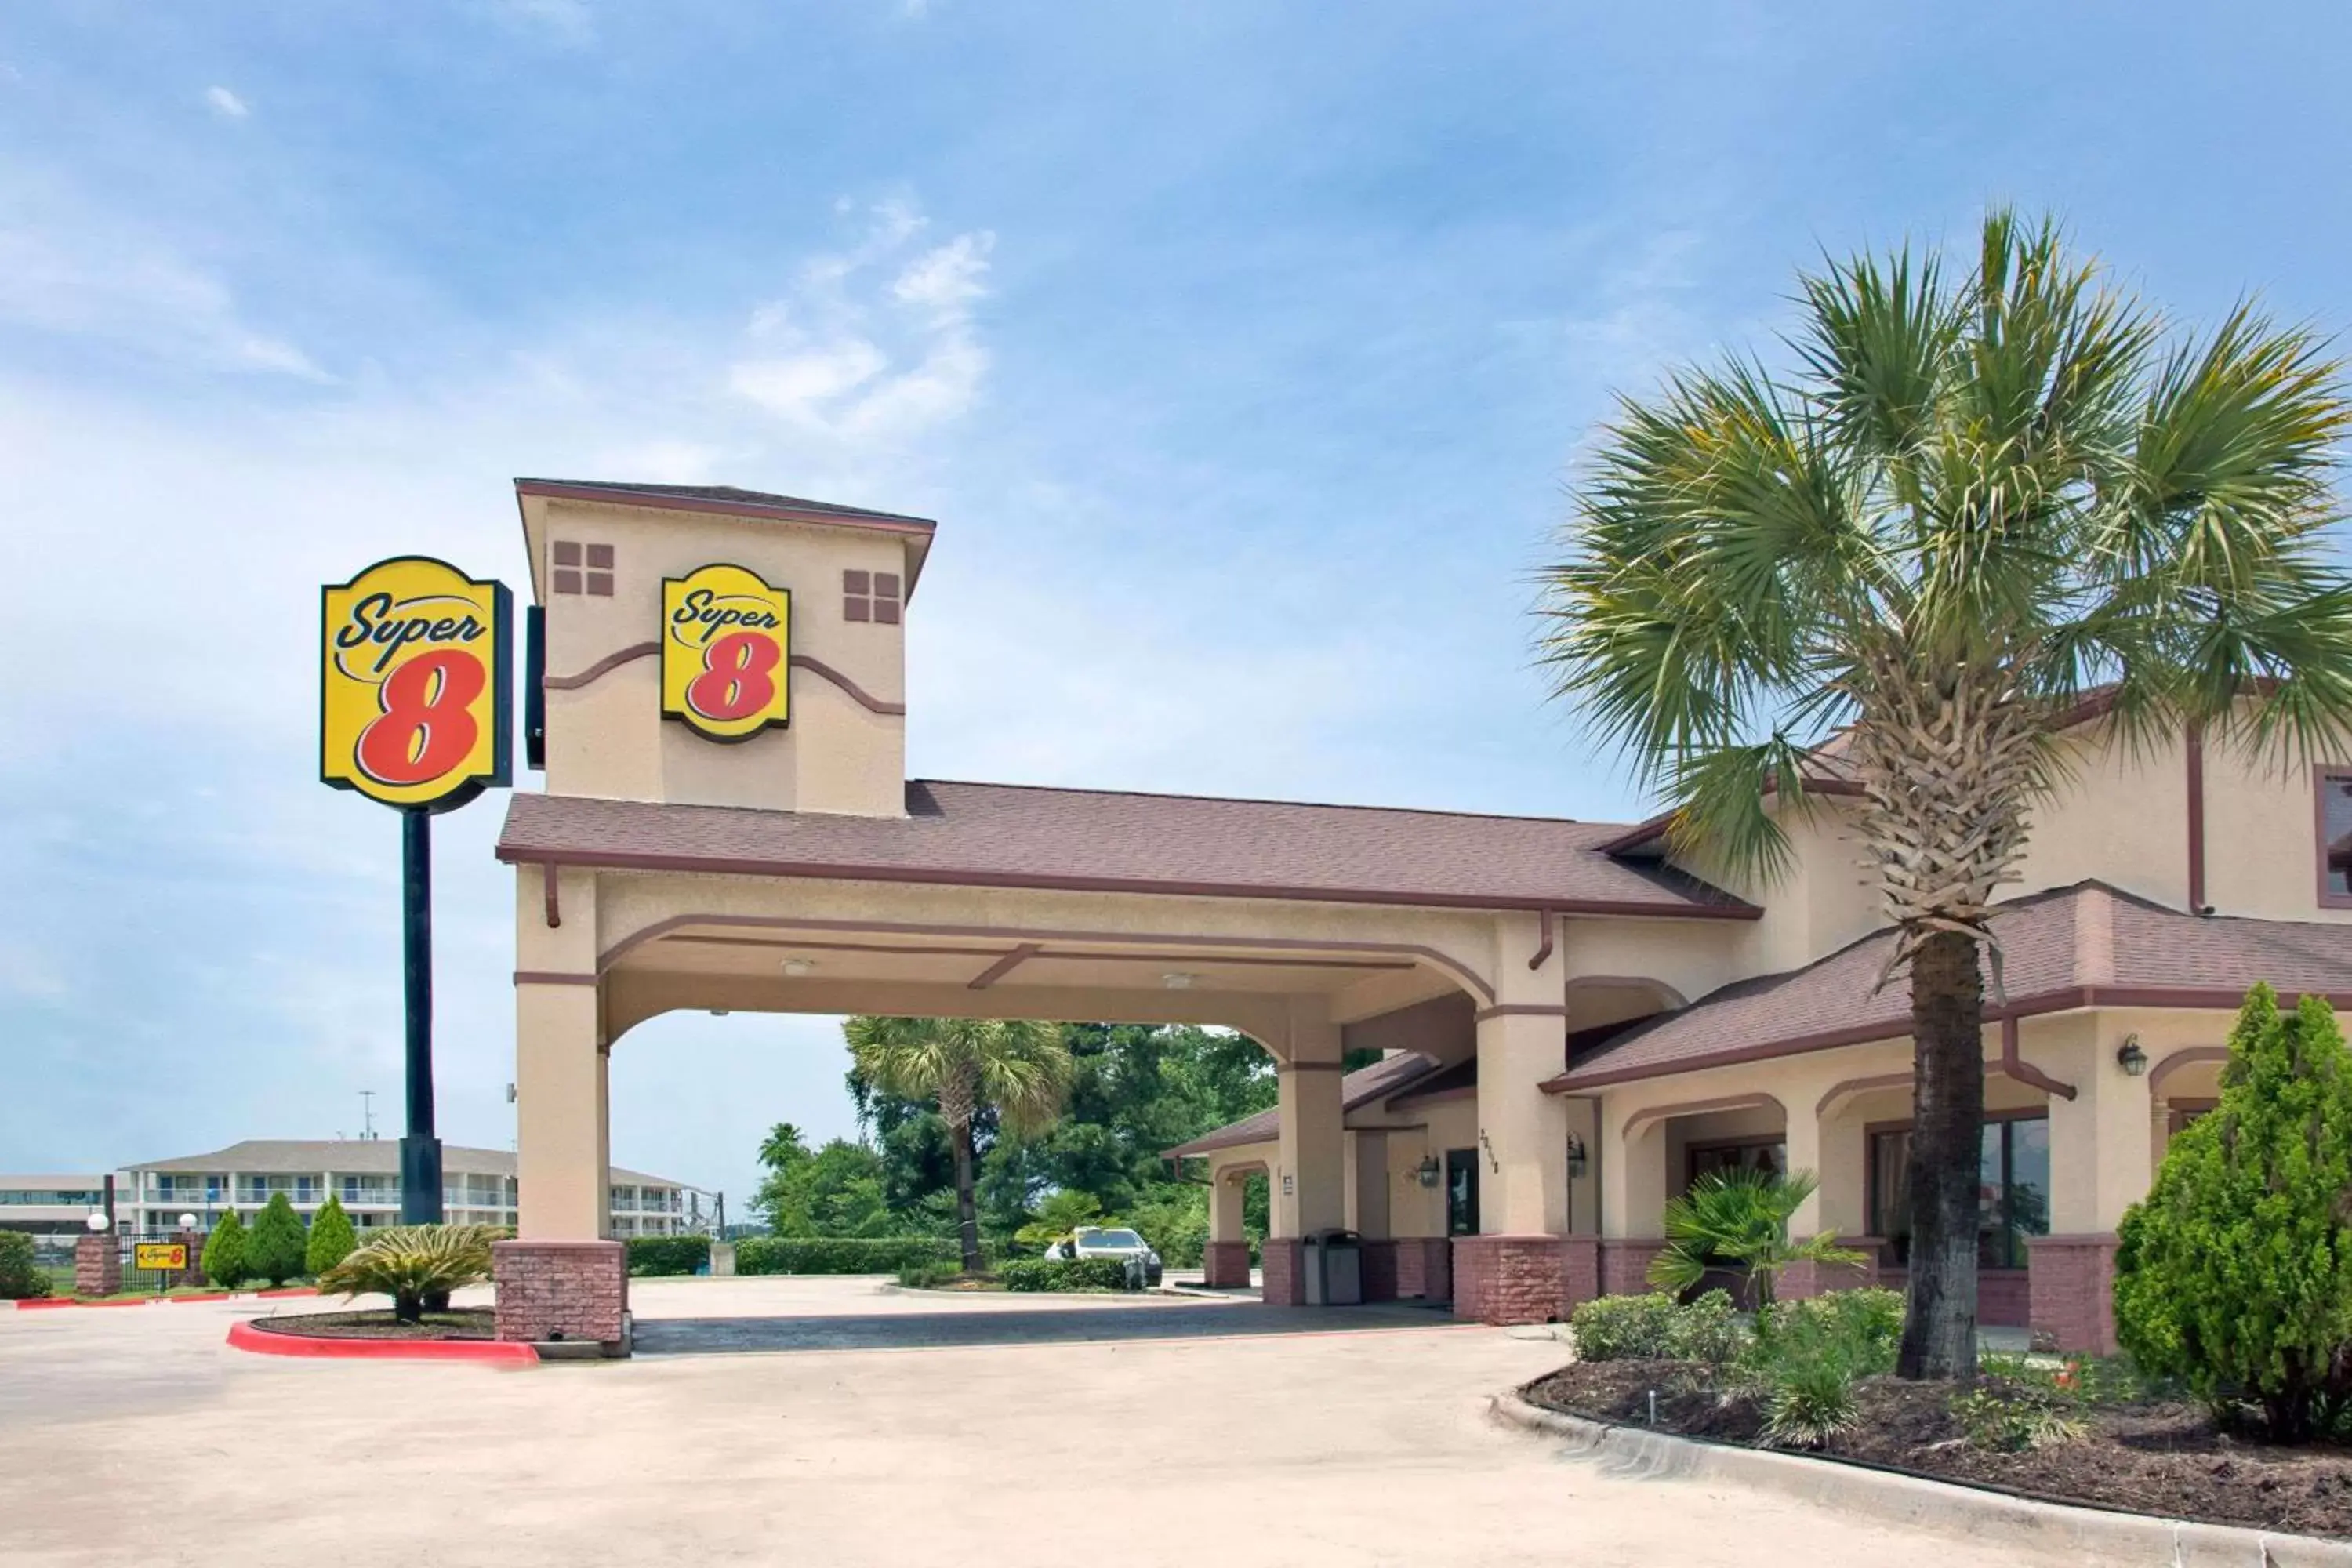 Property Building in Super 8 by Wyndham Humble - Atascocita - FM 1960 I-69